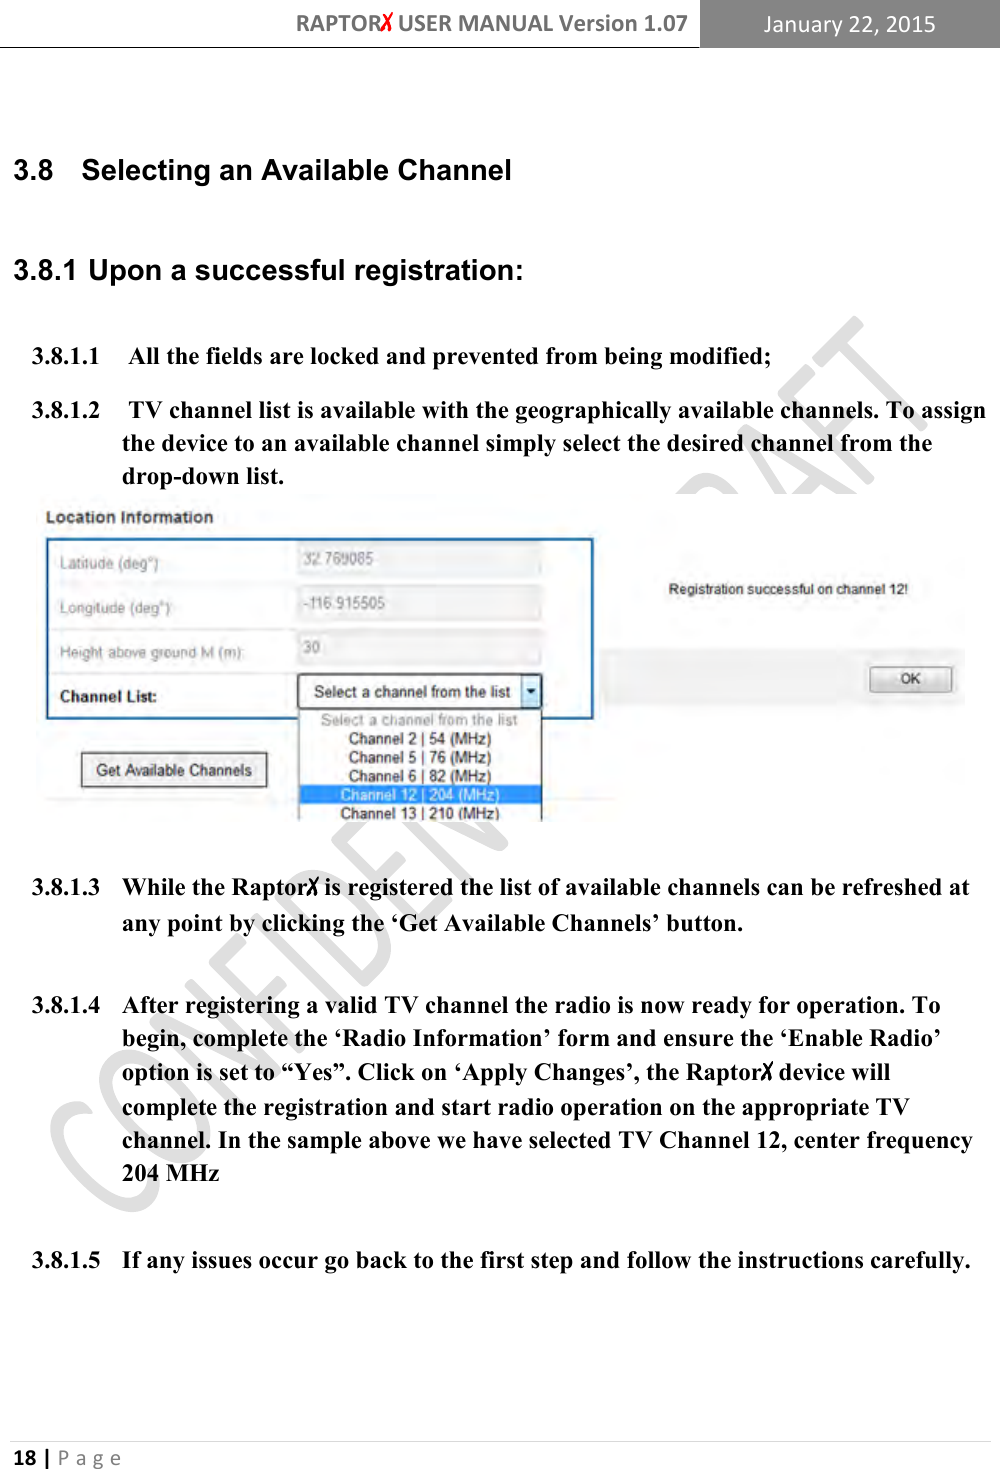 RAPTORX USER MANUAL Version 1.07 January 22, 2015  18 | P a g e    3.8   Selecting an Available Channel   Upon a successful registration: 3.8.1 3.8.1.1  All the fields are locked and prevented from being modified; 3.8.1.2  TV channel list is available with the geographically available channels. To assign the device to an available channel simply select the desired channel from the drop-down list.   3.8.1.3 While the RaptorX is registered the list of available channels can be refreshed at any point by clicking the ‘Get Available Channels’ button.  3.8.1.4 After registering a valid TV channel the radio is now ready for operation. To begin, complete the ‘Radio Information’ form and ensure the ‘Enable Radio’ option is set to “Yes”. Click on ‘Apply Changes’, the RaptorX device will complete the registration and start radio operation on the appropriate TV channel. In the sample above we have selected TV Channel 12, center frequency 204 MHz  3.8.1.5 If any issues occur go back to the first step and follow the instructions carefully.  